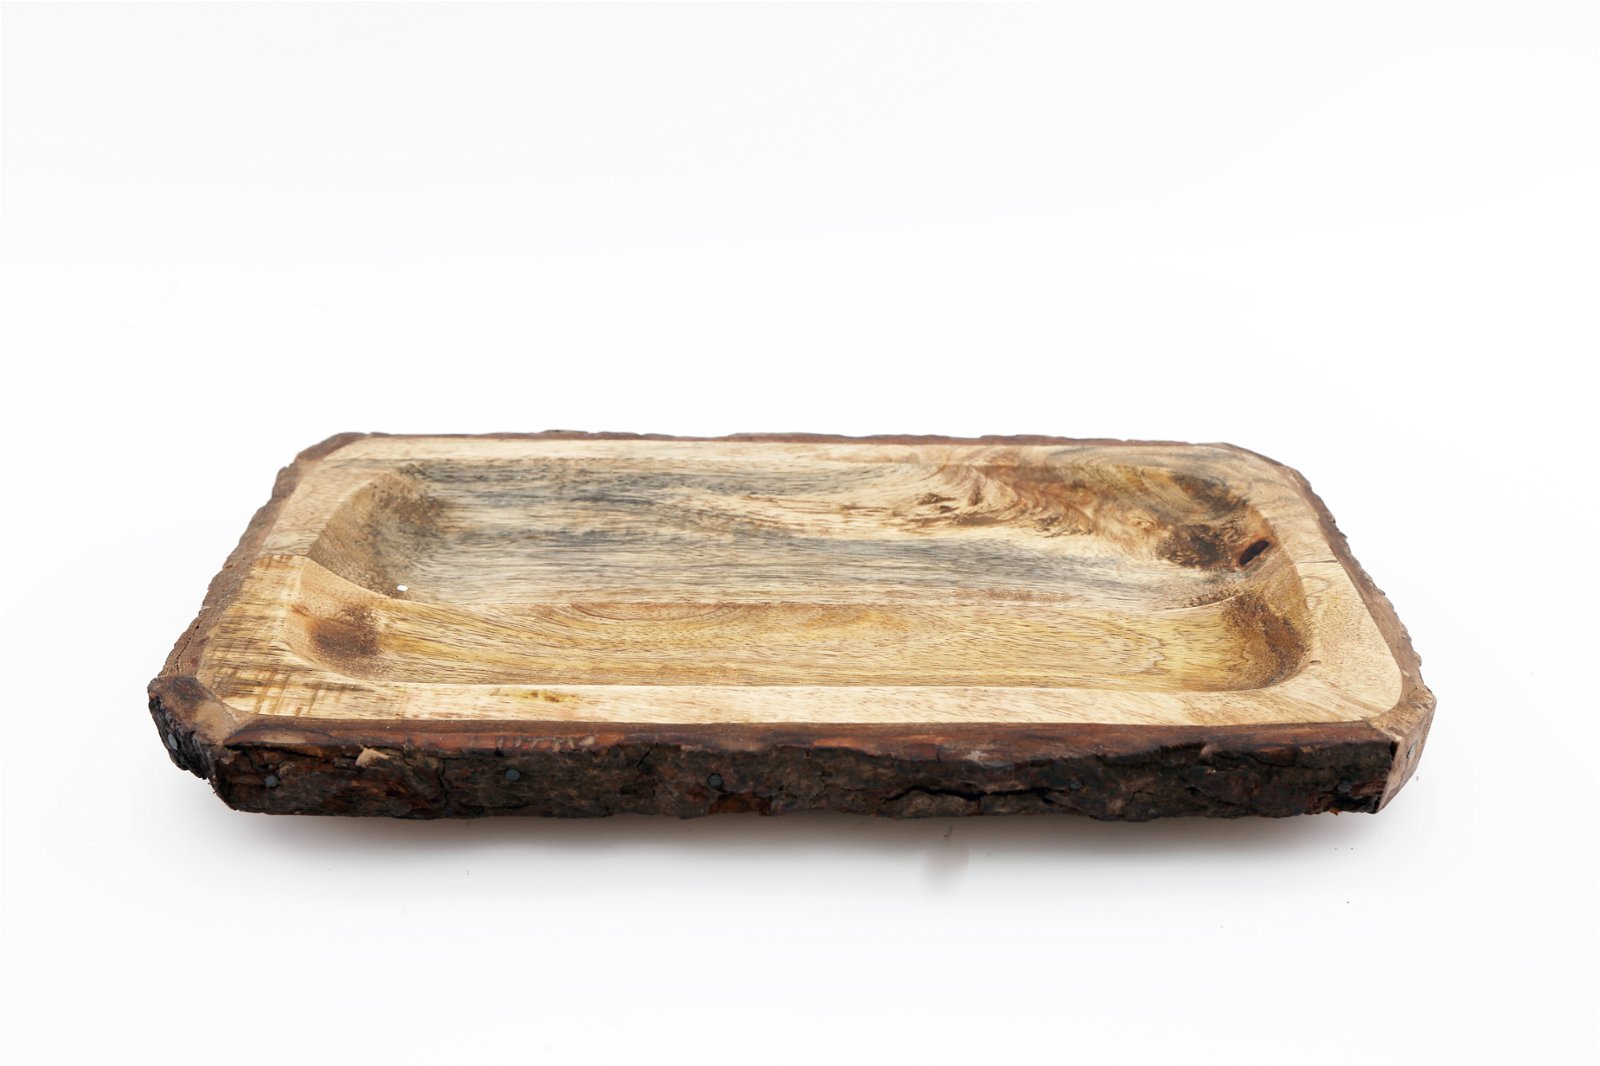 Small Wooden Platter Tray With Bark Edging - Kaftan direct